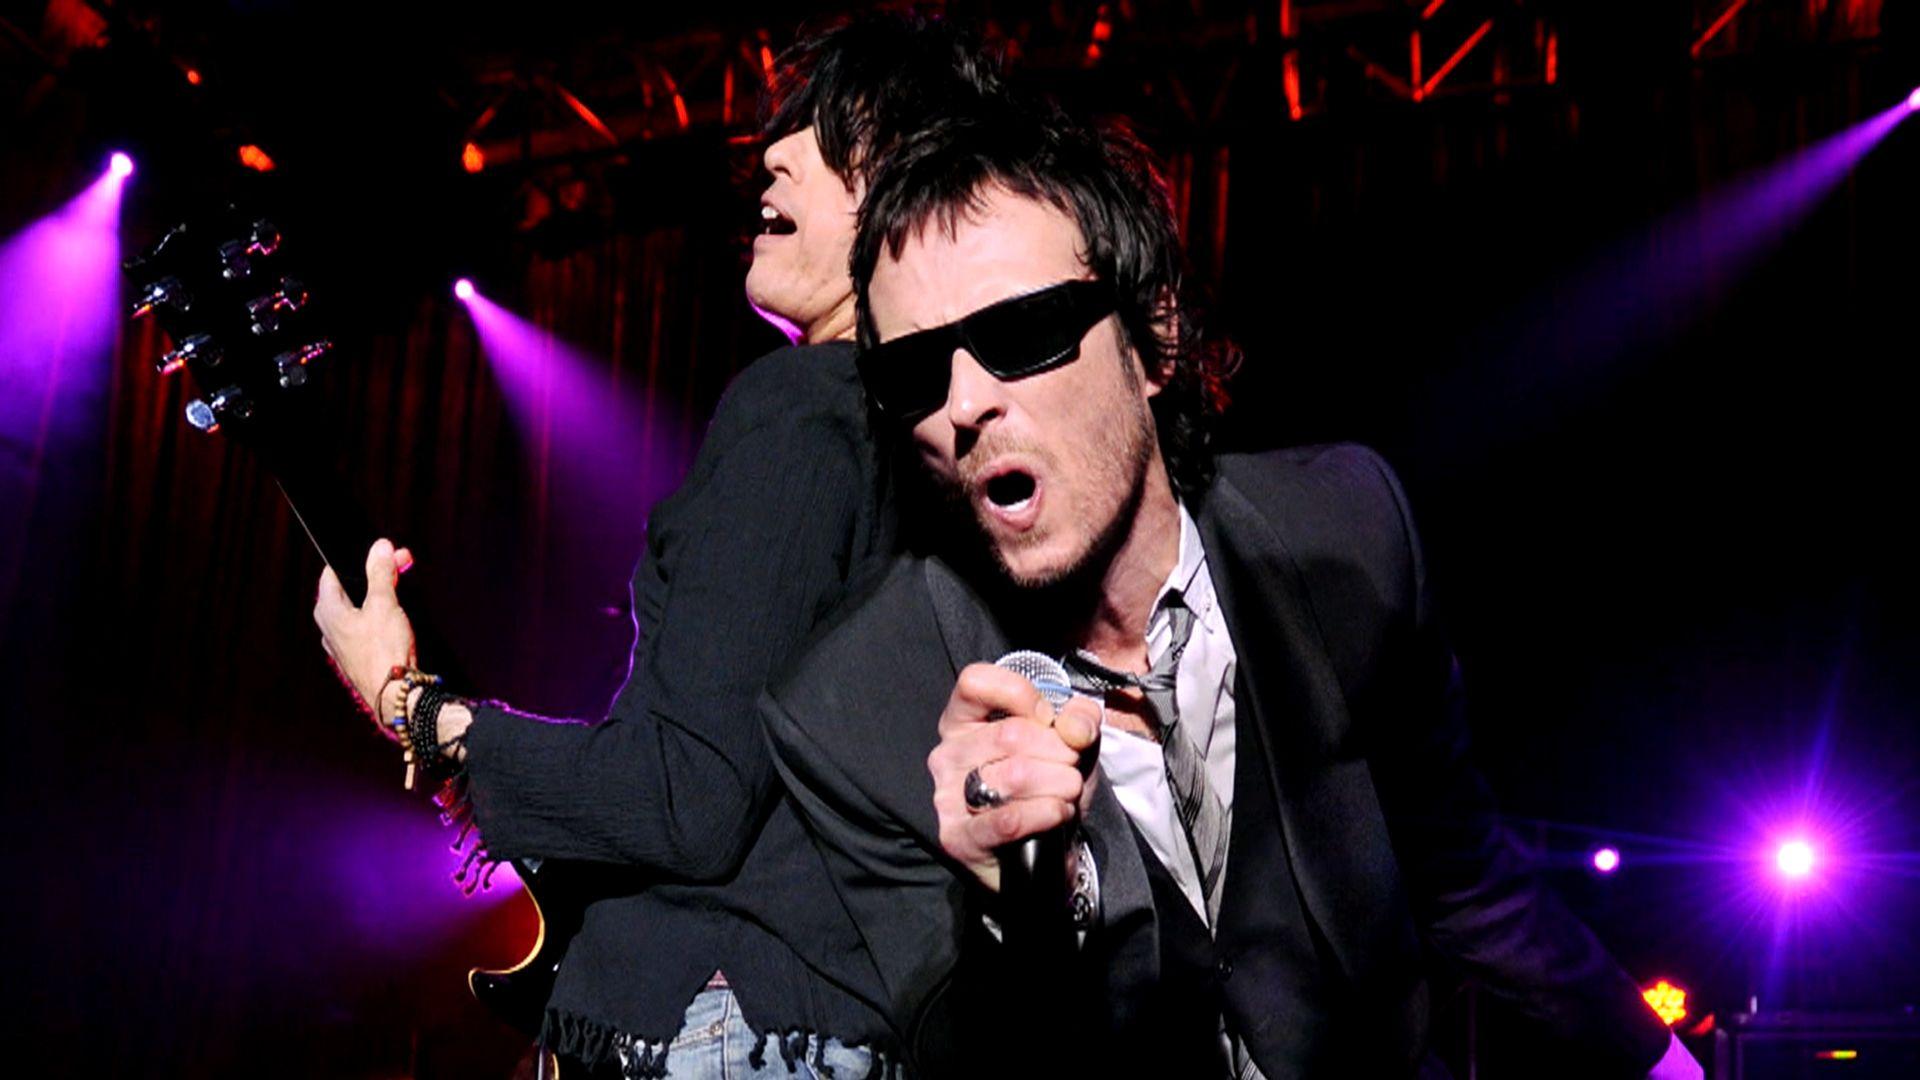 Scott Weiland of Stone Temple Pilots dies at age 48